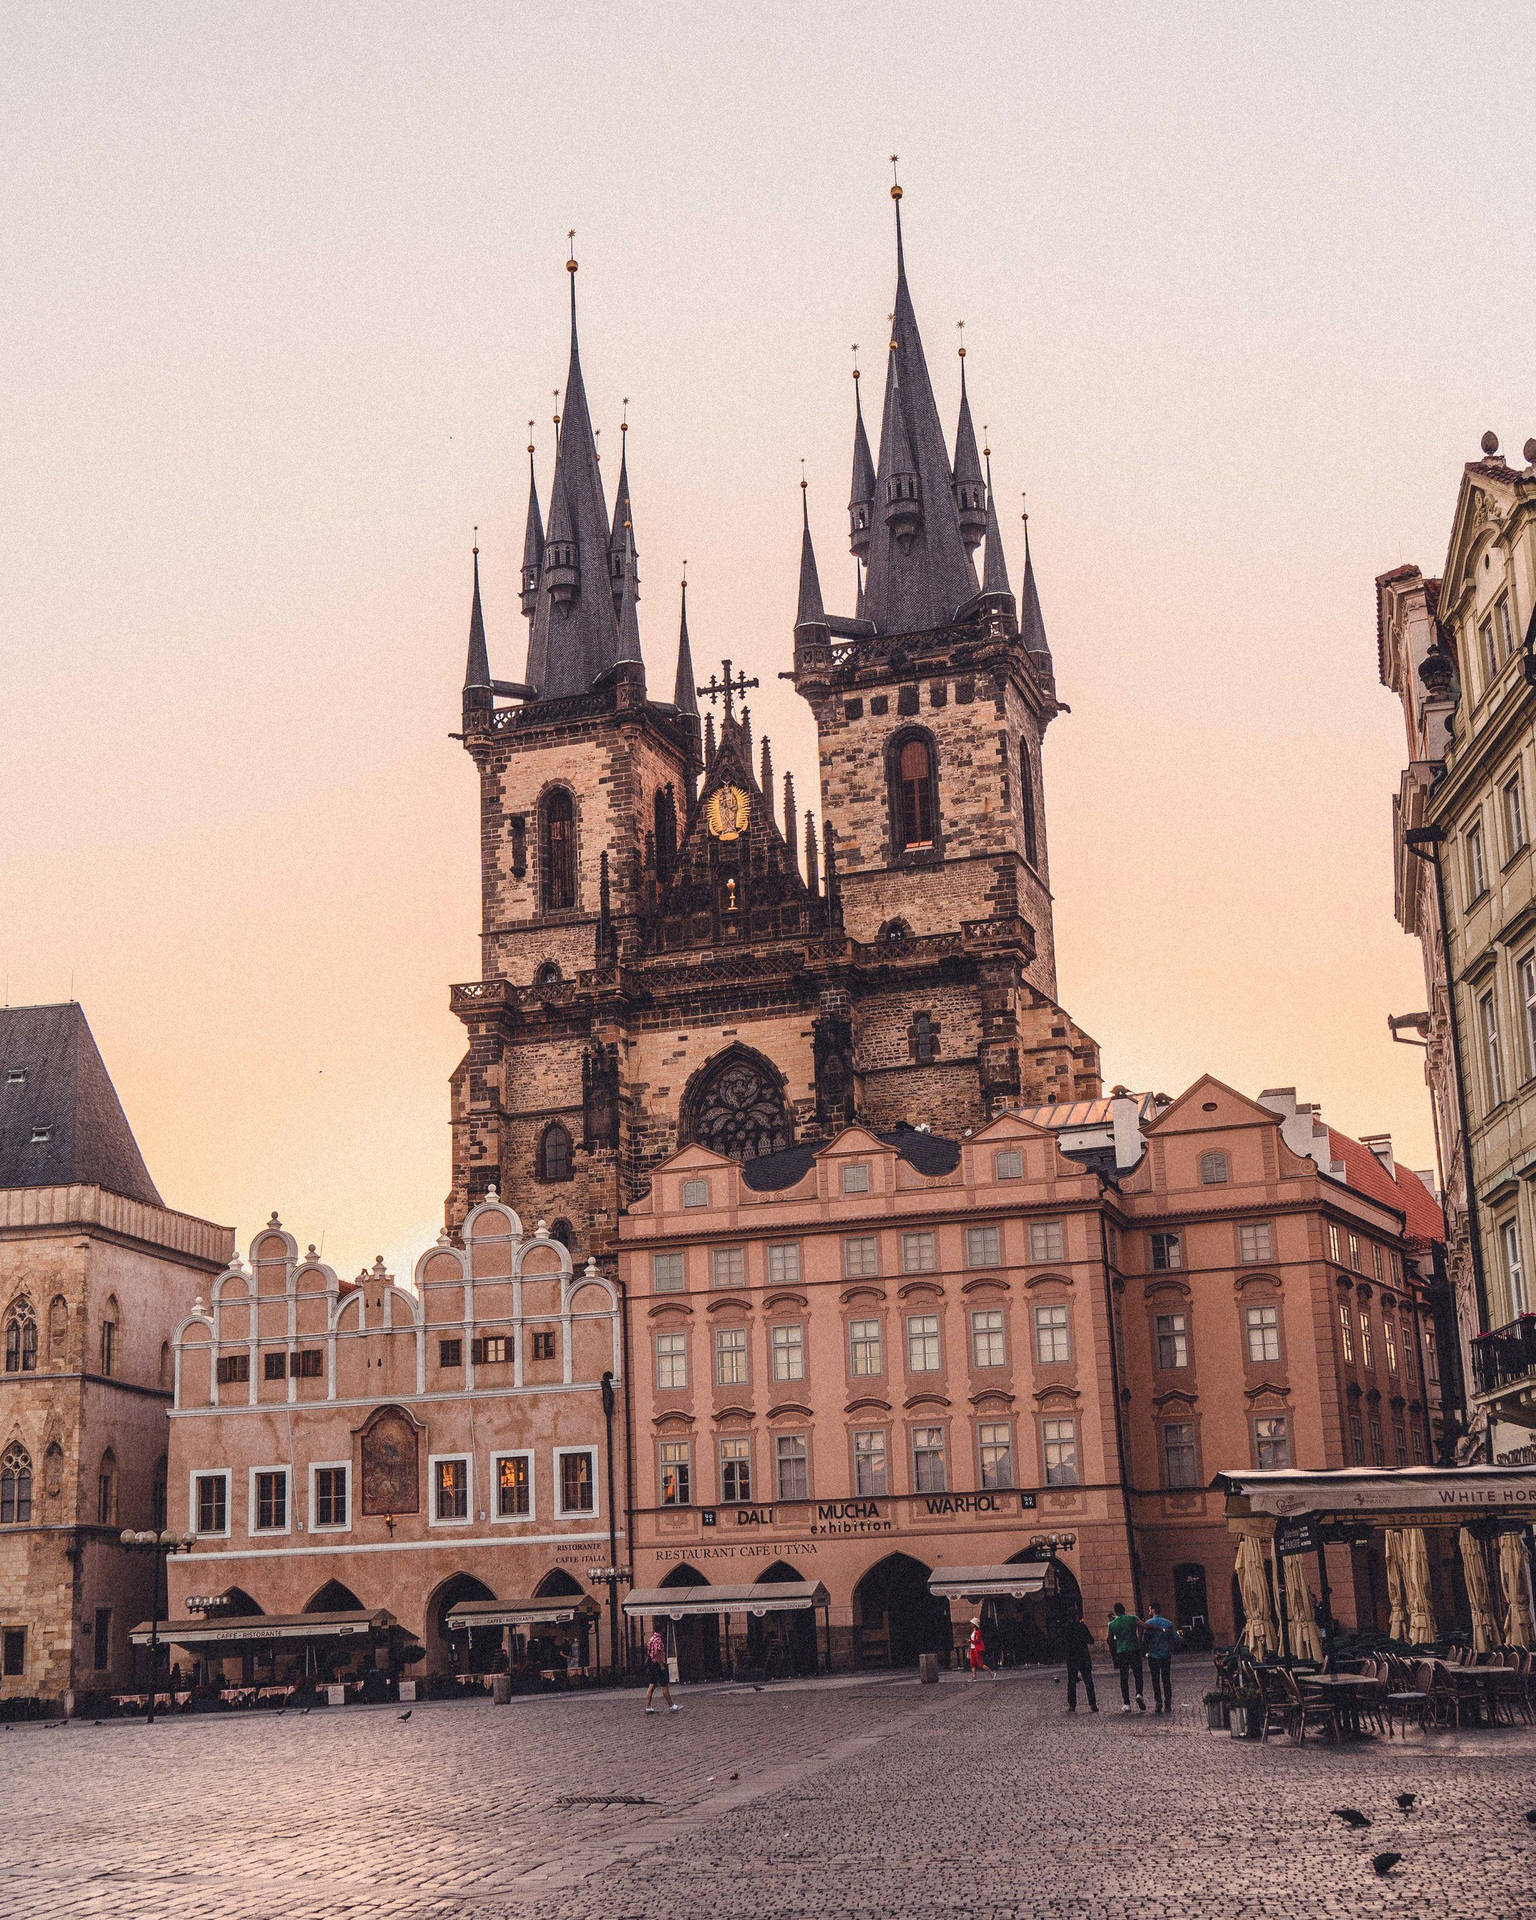 Caption: Enchanting View of Prague's Iconic Gothic Church Wallpaper